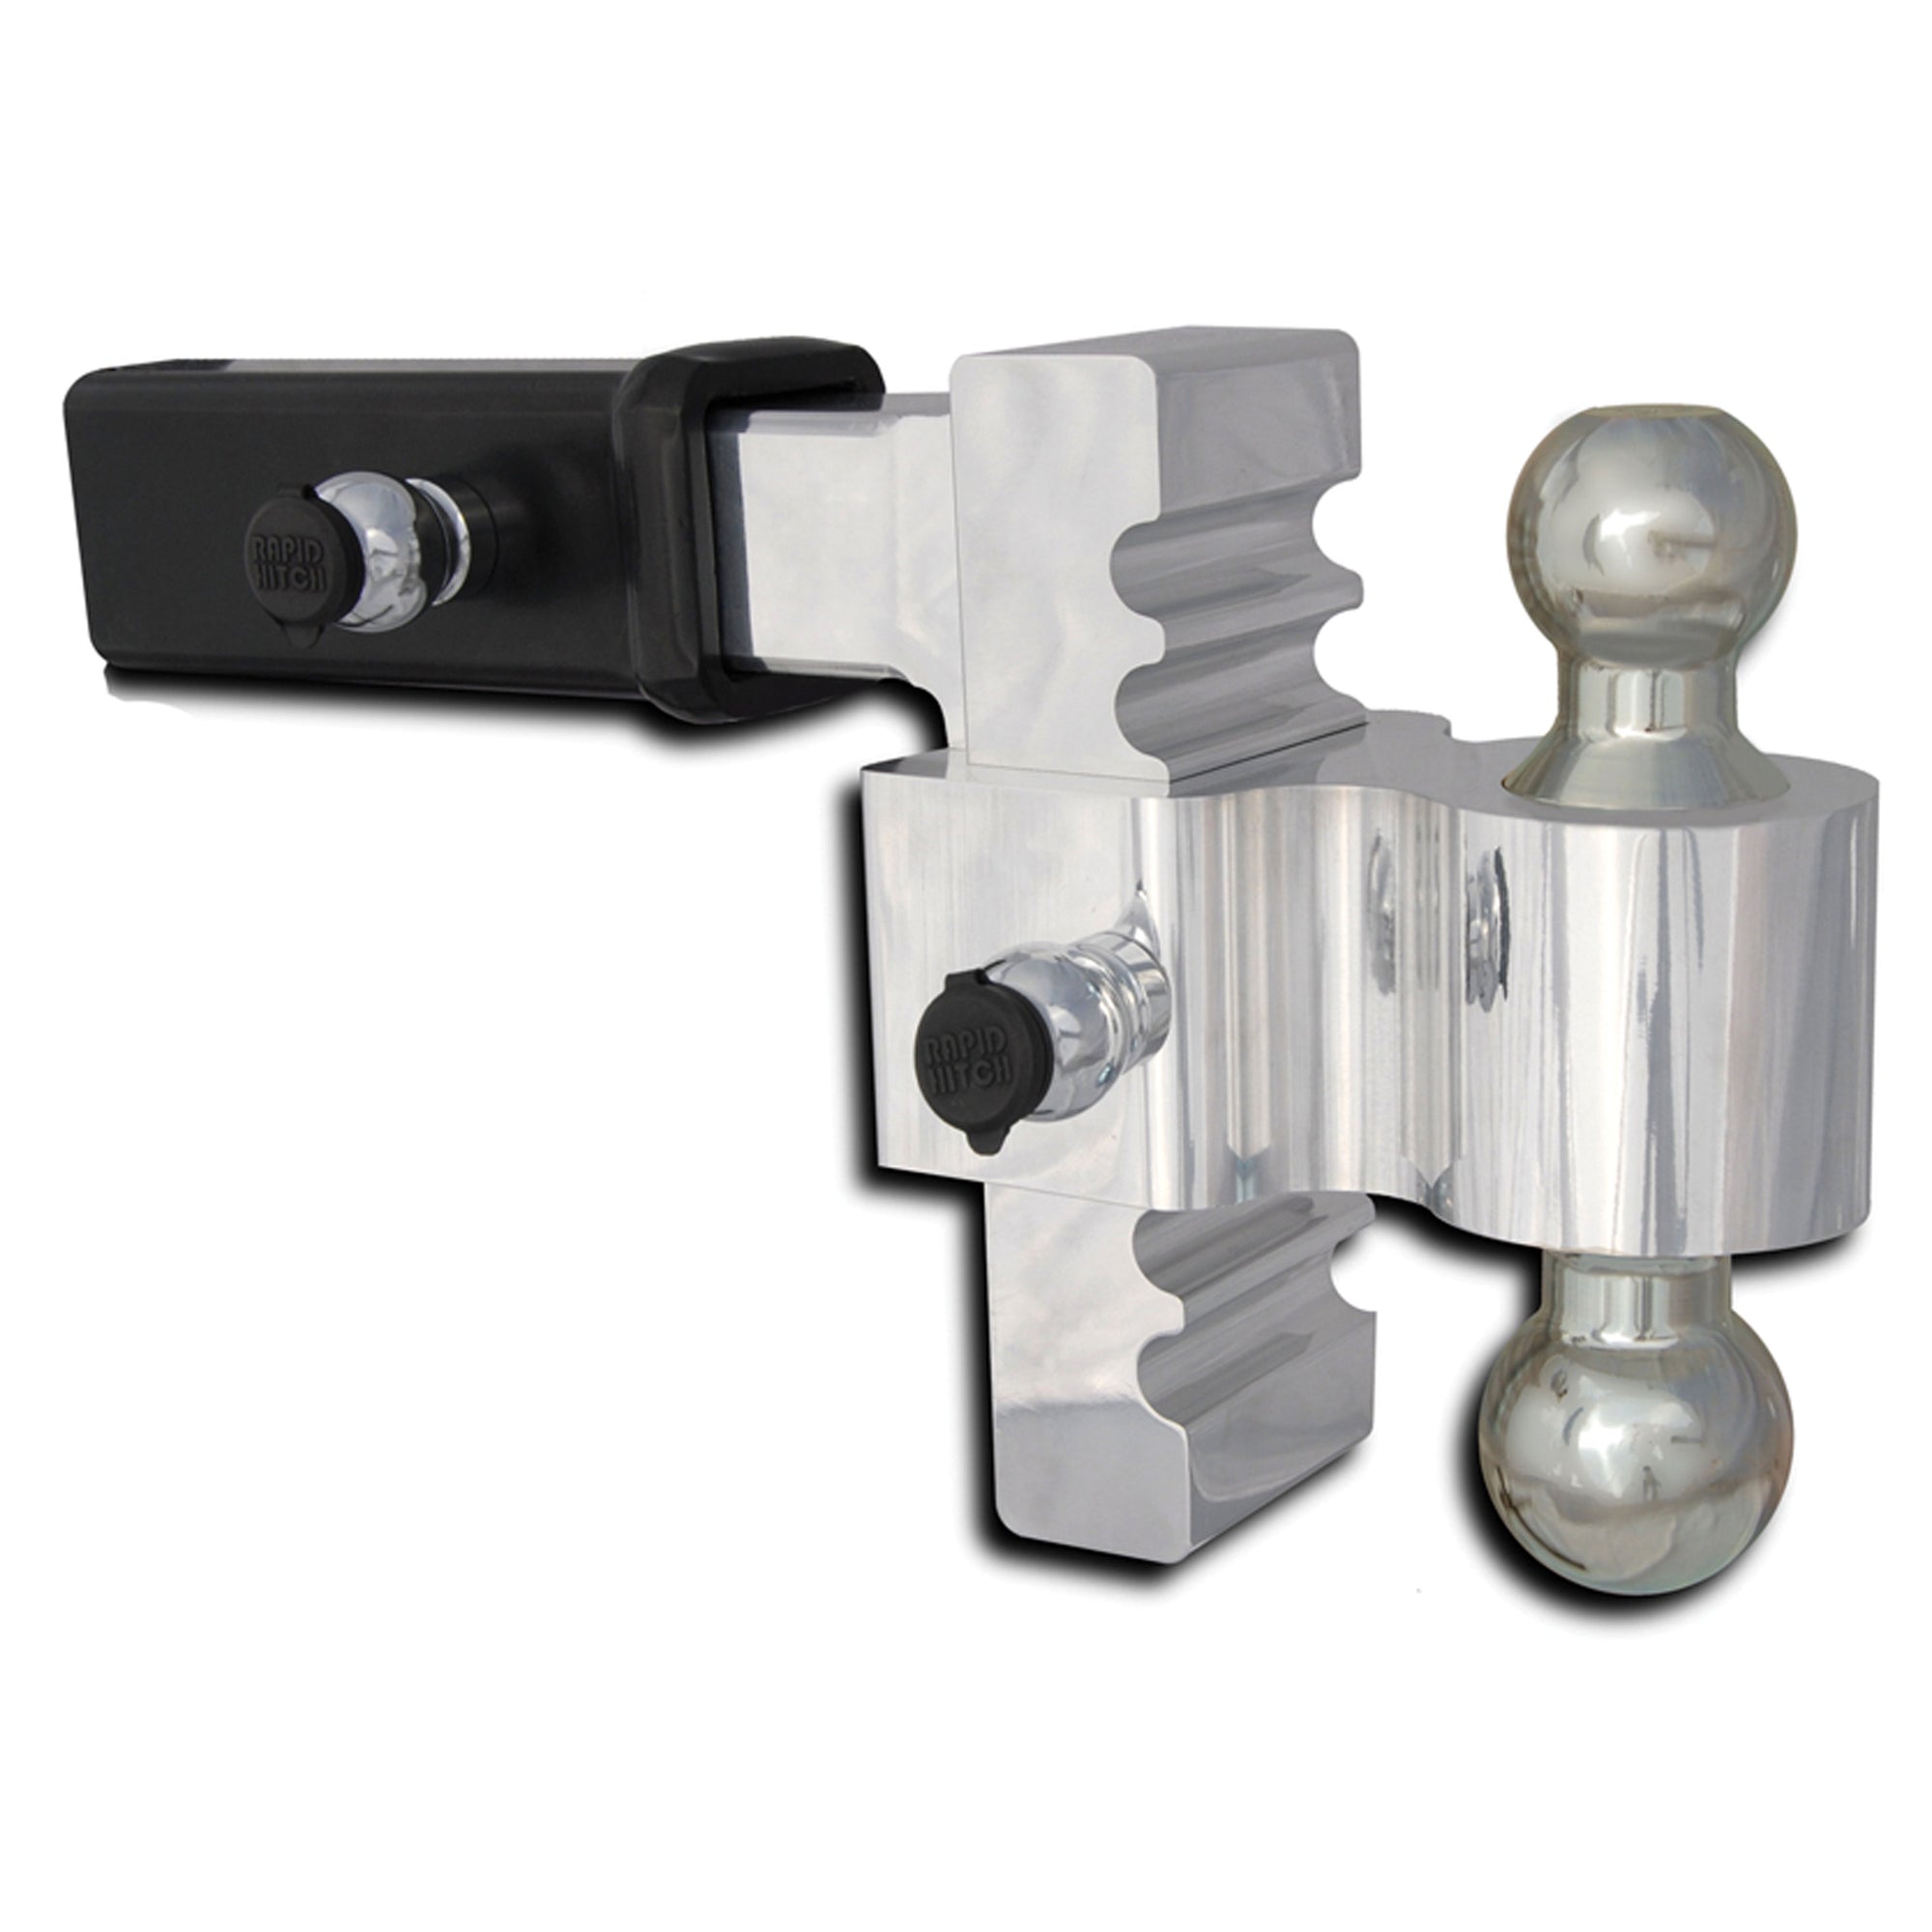 Andersen Hitches REPL BY 3410 & 3492 Rapid Hitch Adjustable Aluminum Ball Mount with 2" and 2-5/16" Balls - 2" Receiver, Up to 6" Drop